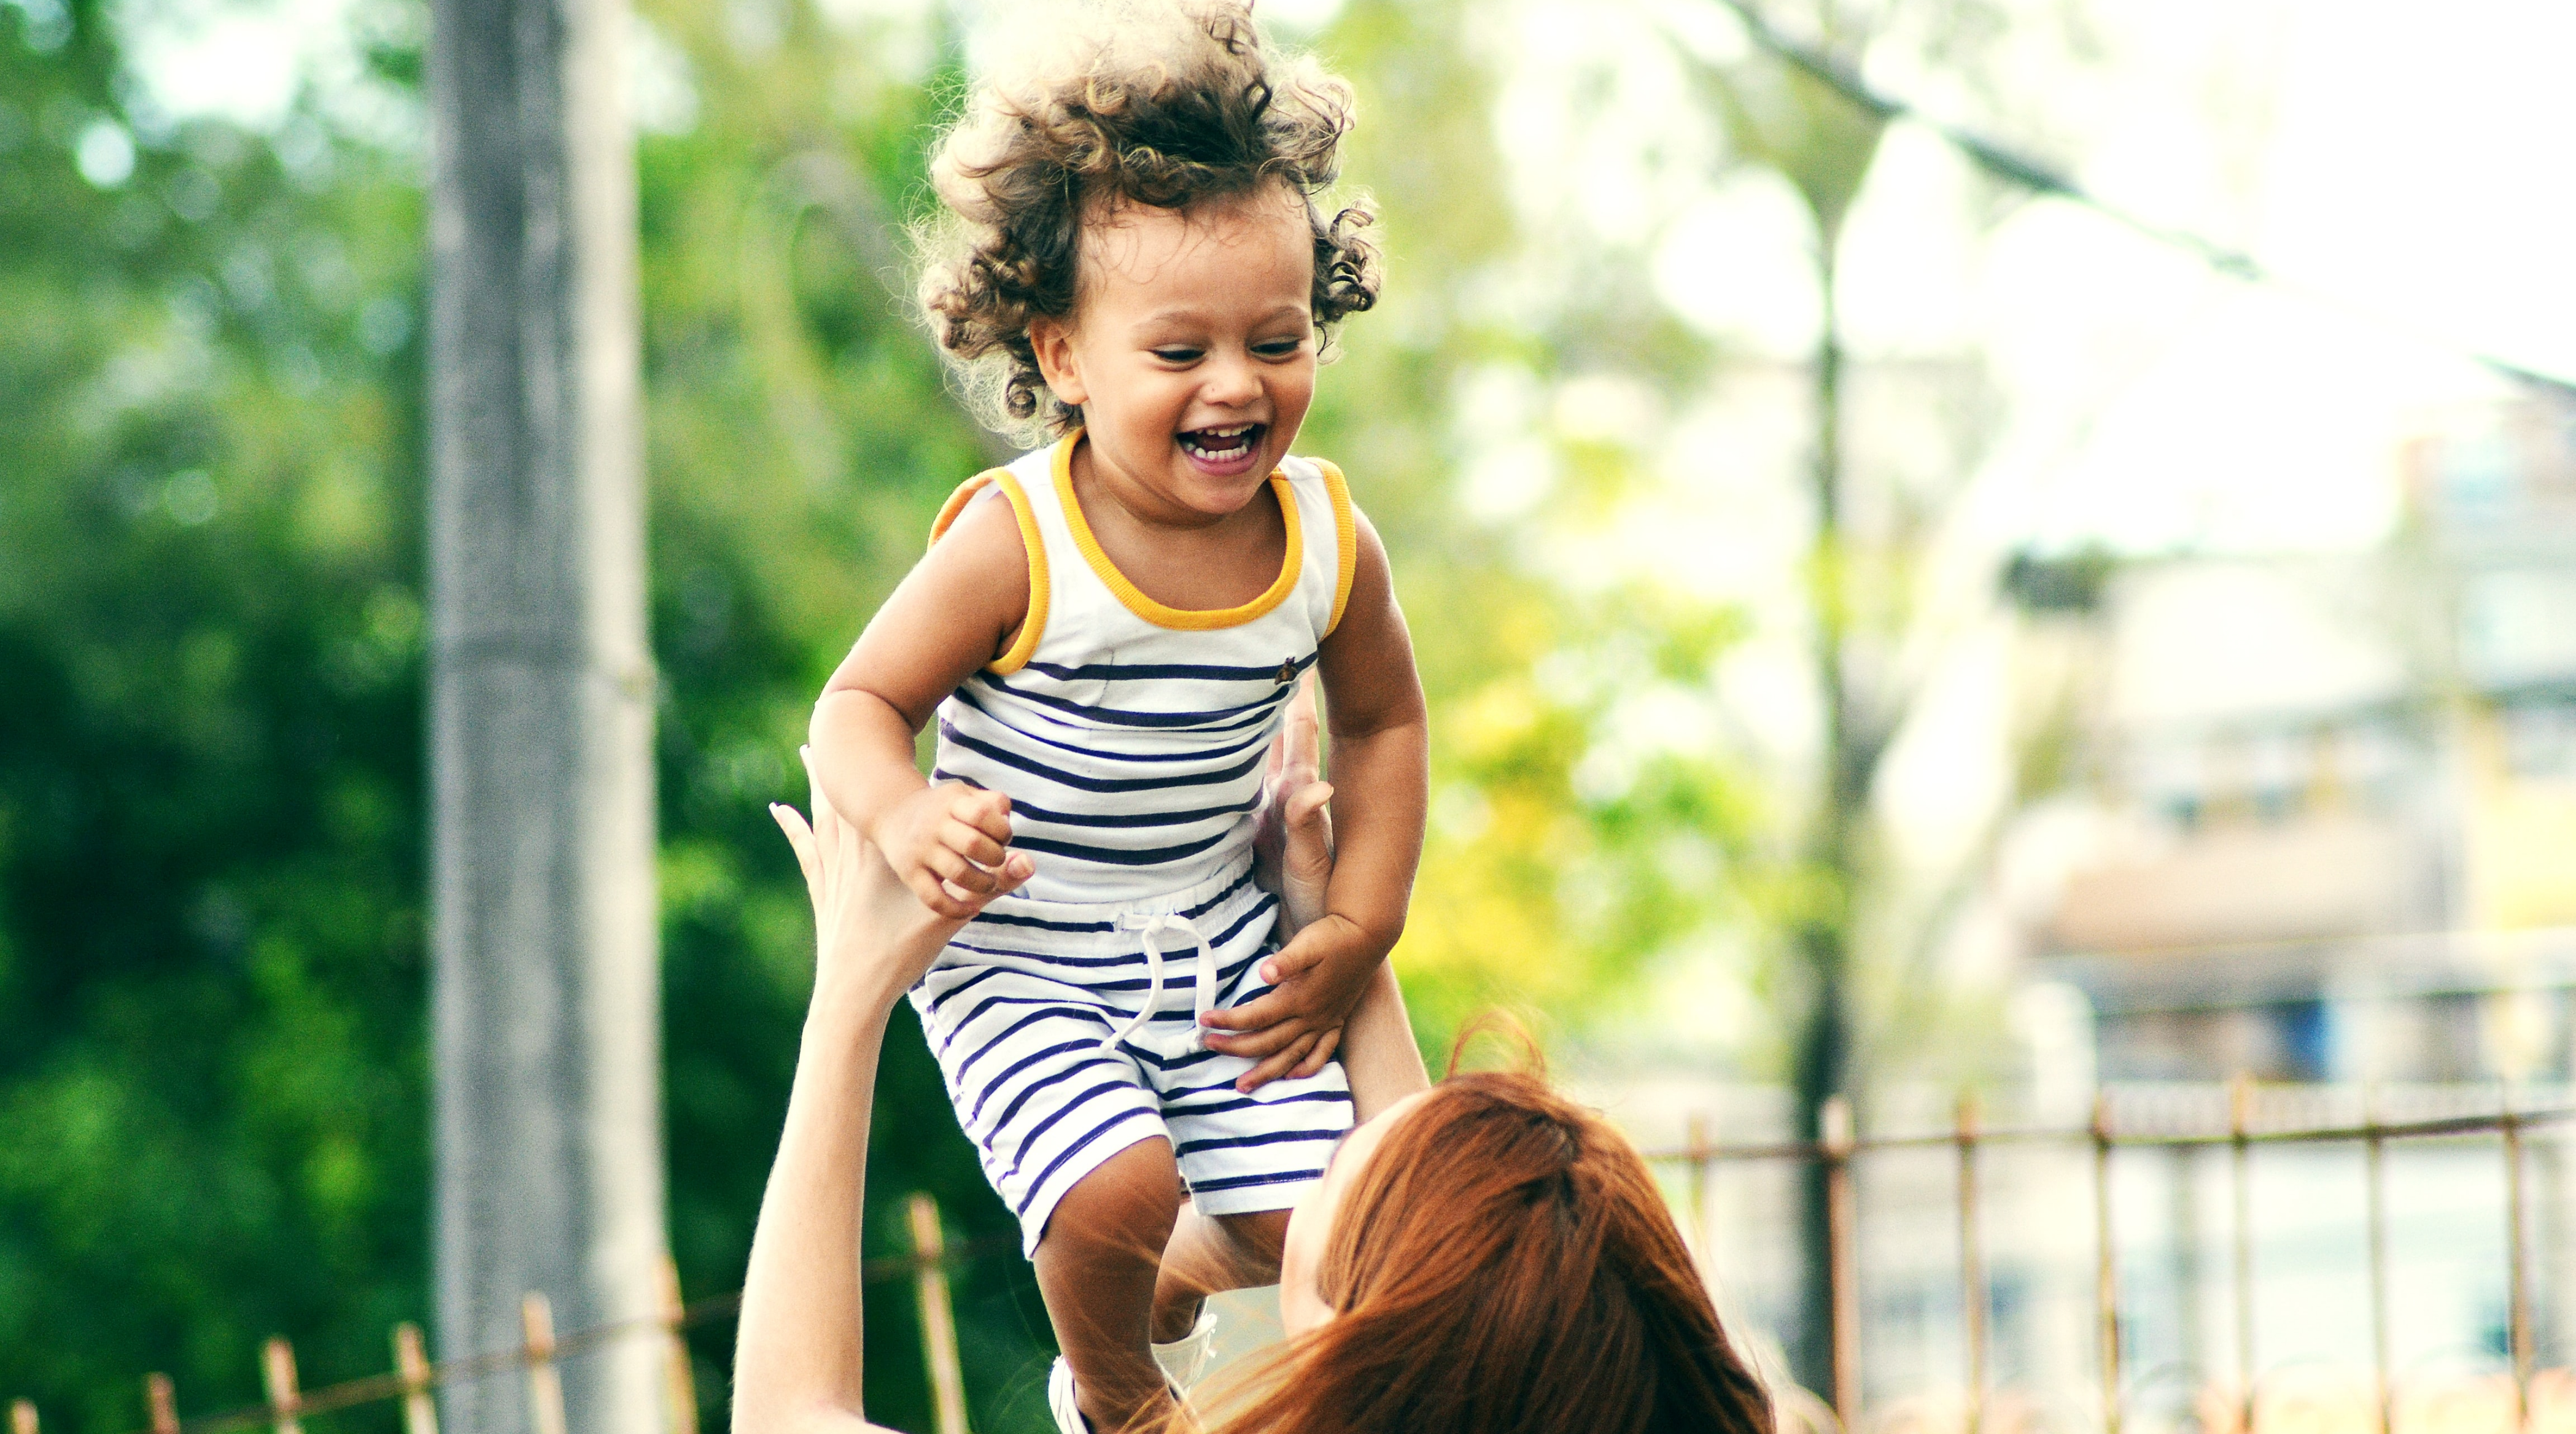 A laughing child with a striped outfit and curly hair is being tossed in the air by a woman.